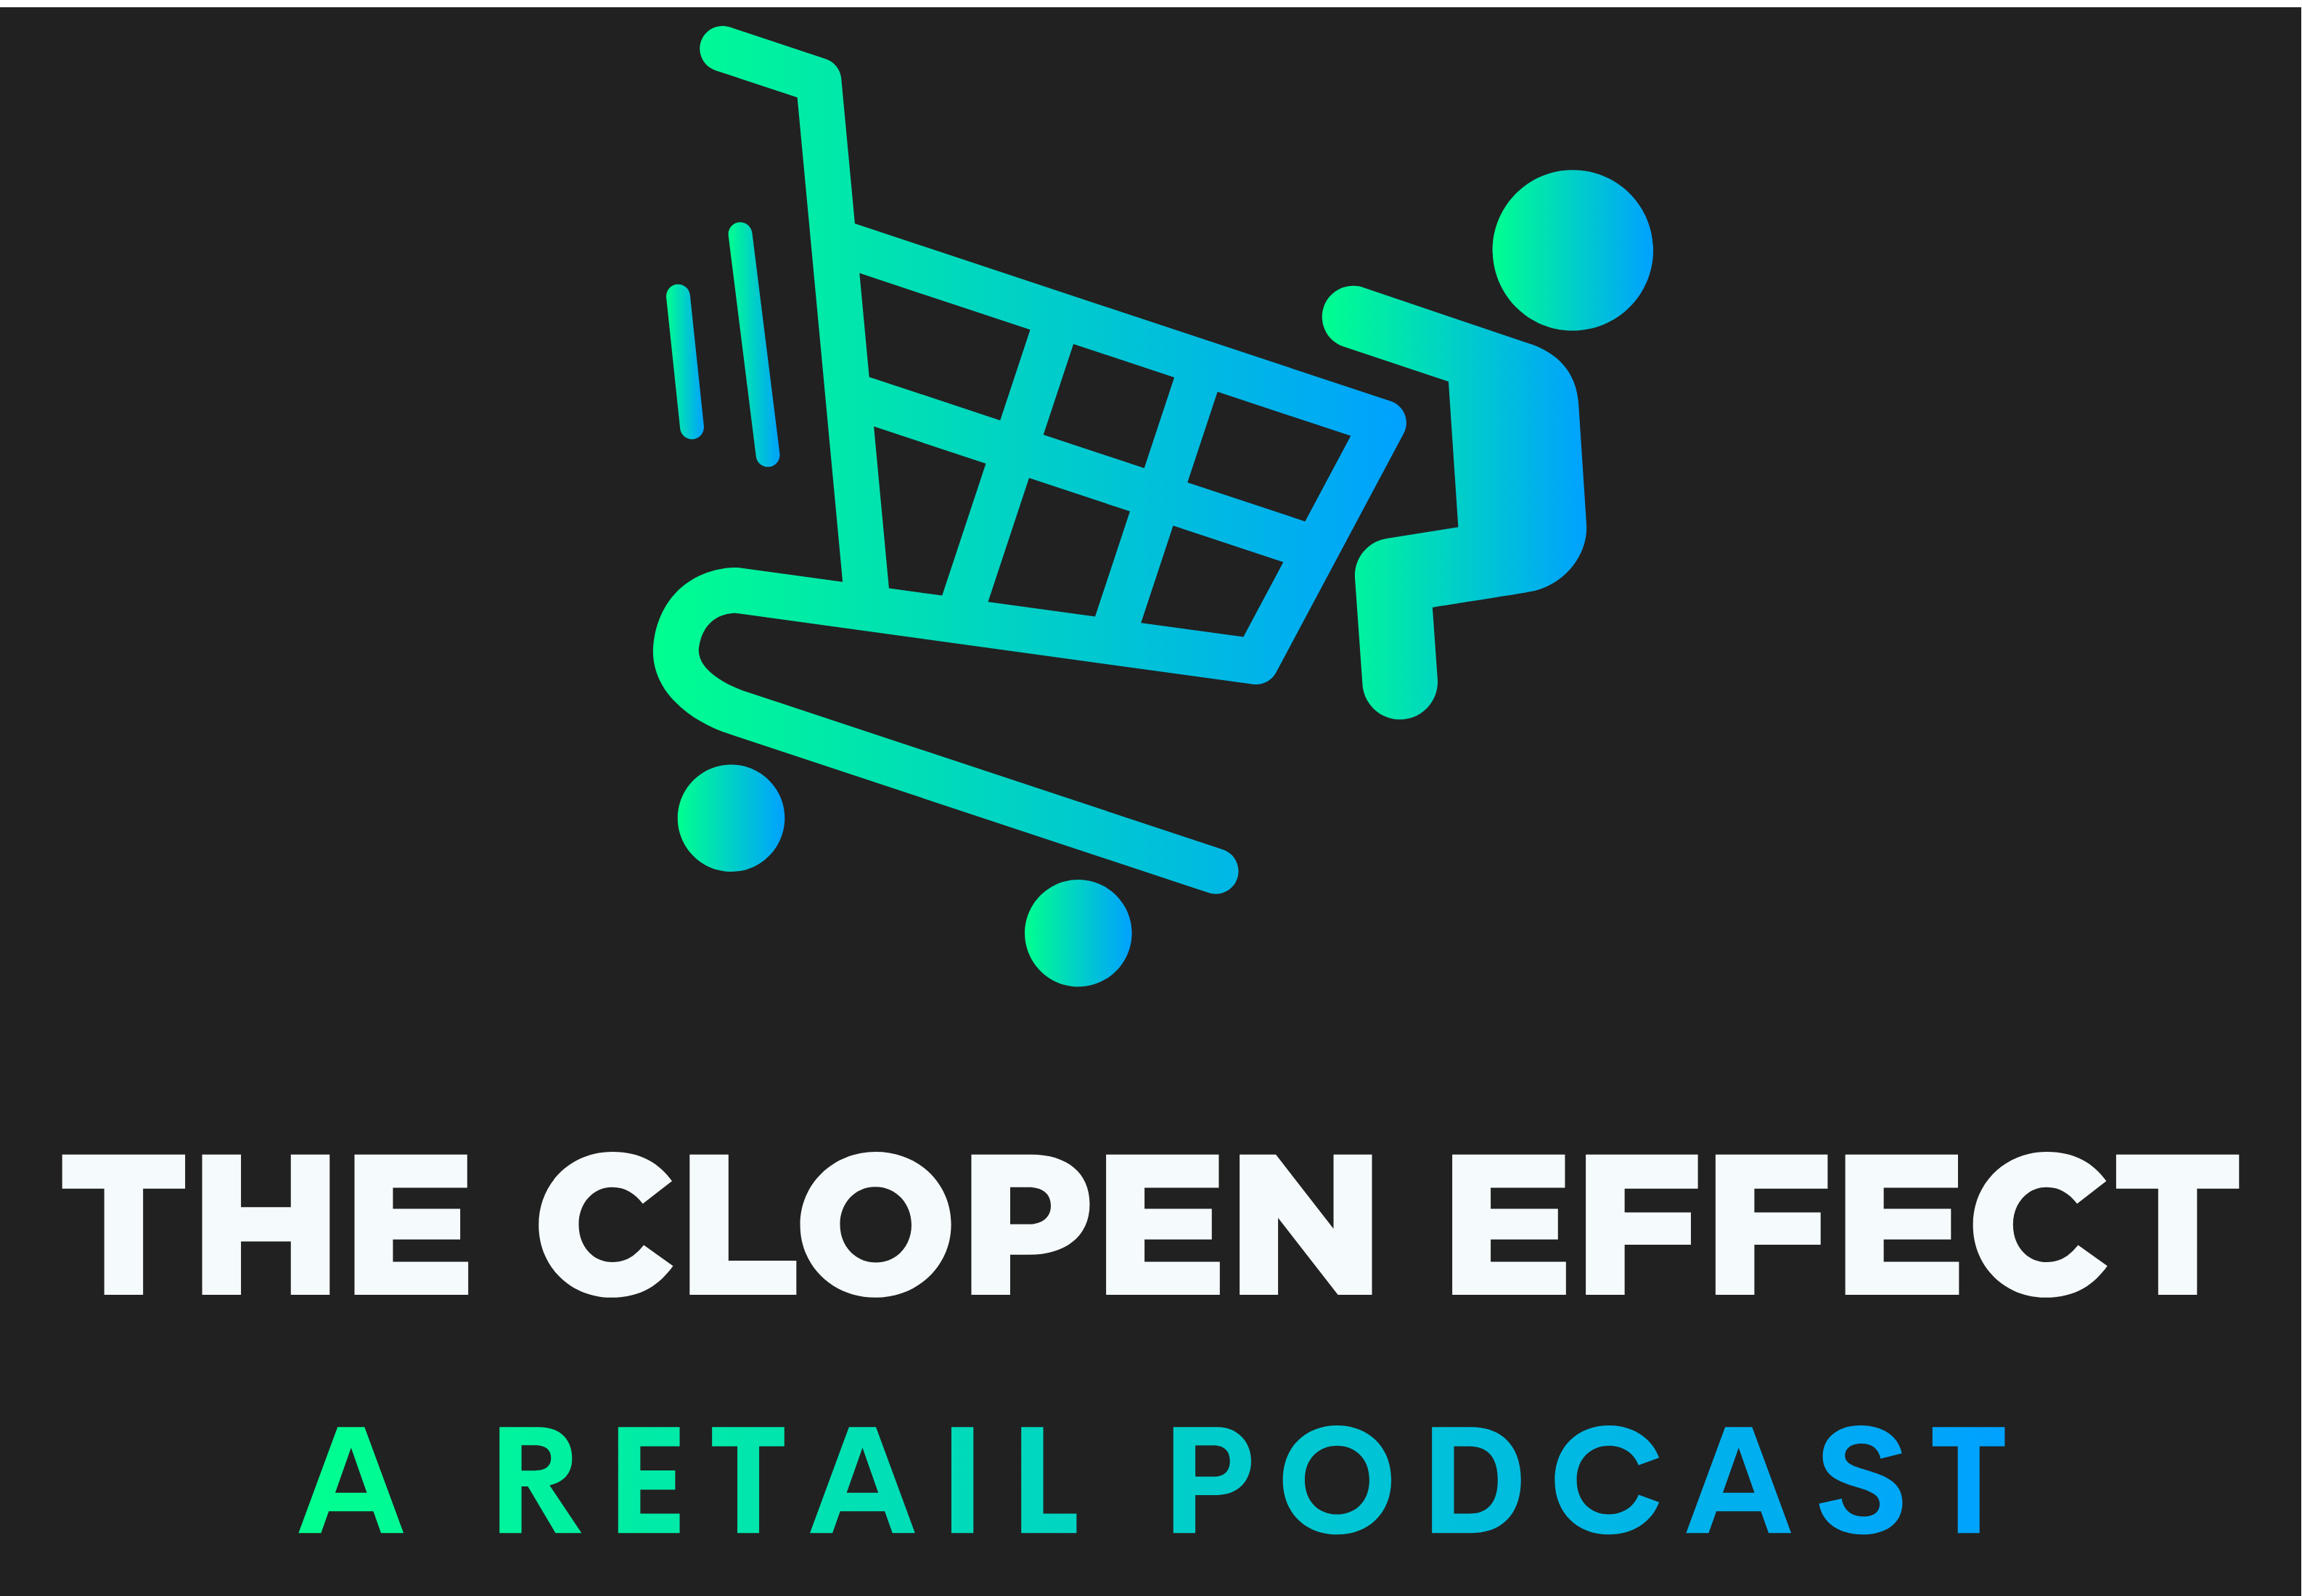 The Clopen Effect - A Retail Podcast